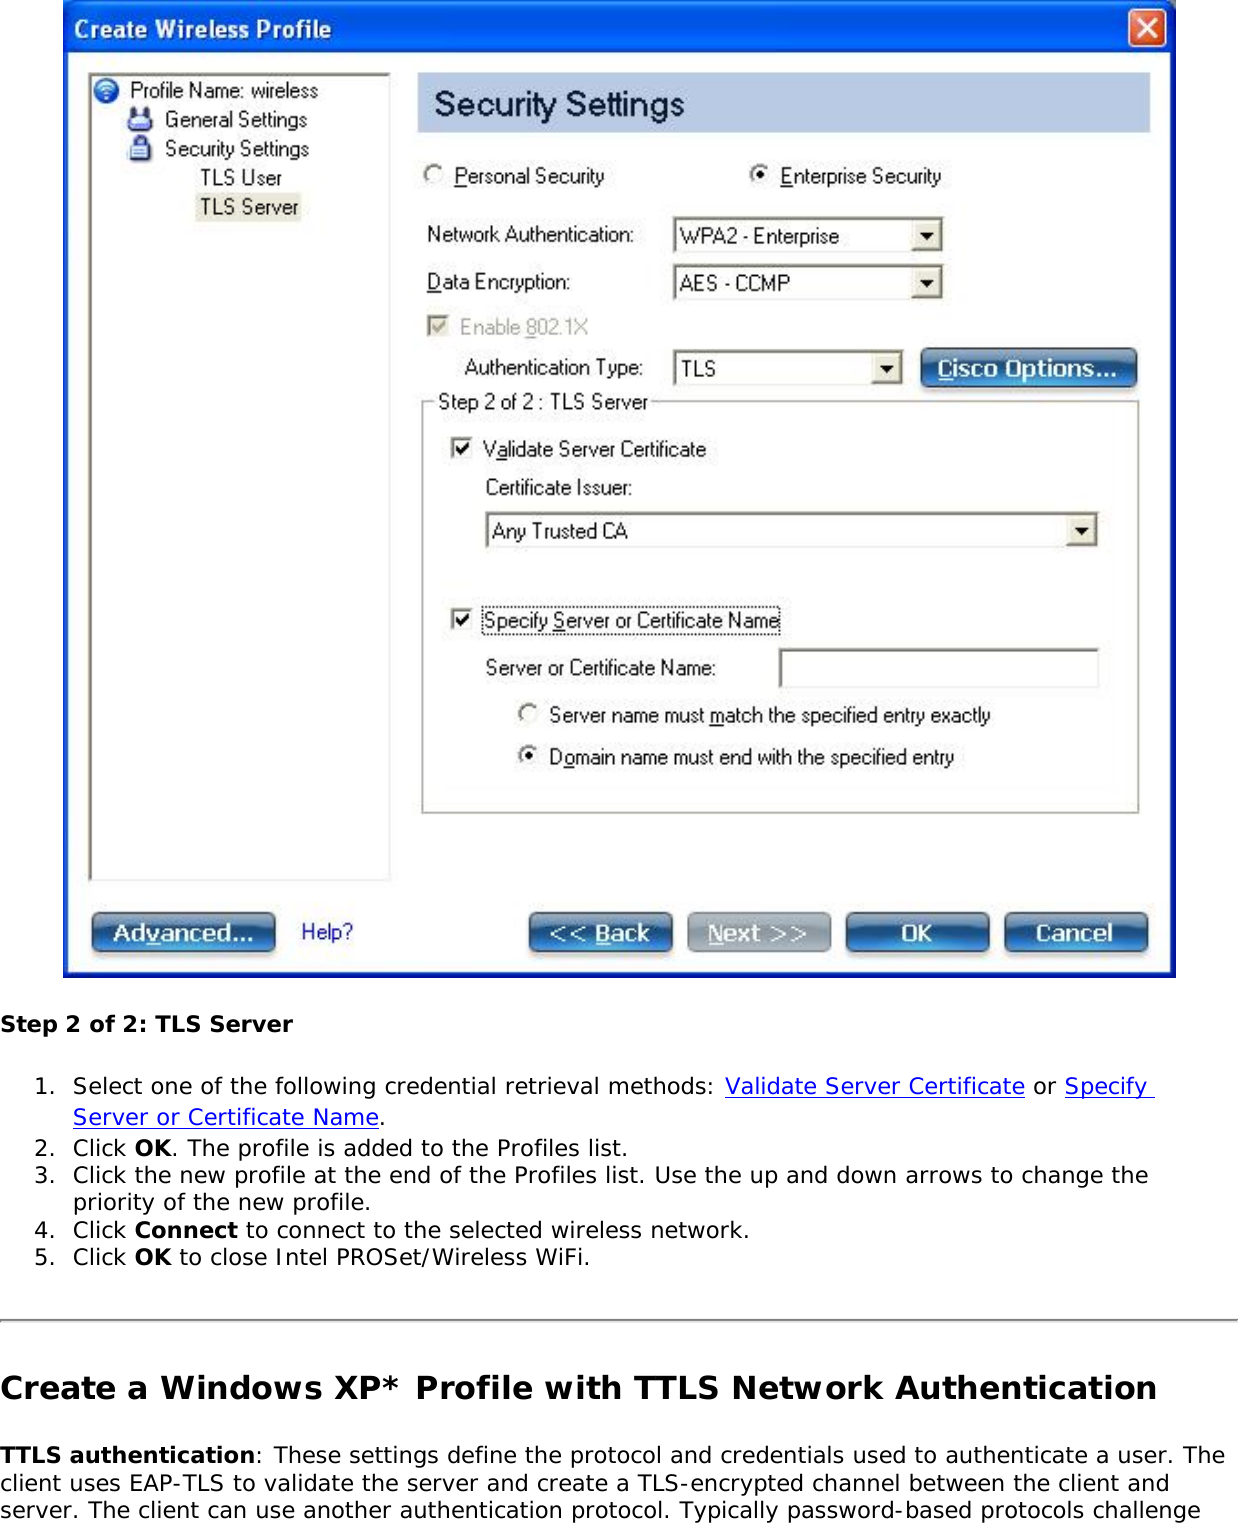 Step 2 of 2: TLS Server1.  Select one of the following credential retrieval methods: Validate Server Certificate or Specify Server or Certificate Name. 2.  Click OK. The profile is added to the Profiles list. 3.  Click the new profile at the end of the Profiles list. Use the up and down arrows to change the priority of the new profile. 4.  Click Connect to connect to the selected wireless network. 5.  Click OK to close Intel PROSet/Wireless WiFi. Create a Windows XP* Profile with TTLS Network Authentication TTLS authentication: These settings define the protocol and credentials used to authenticate a user. The client uses EAP-TLS to validate the server and create a TLS-encrypted channel between the client and server. The client can use another authentication protocol. Typically password-based protocols challenge 